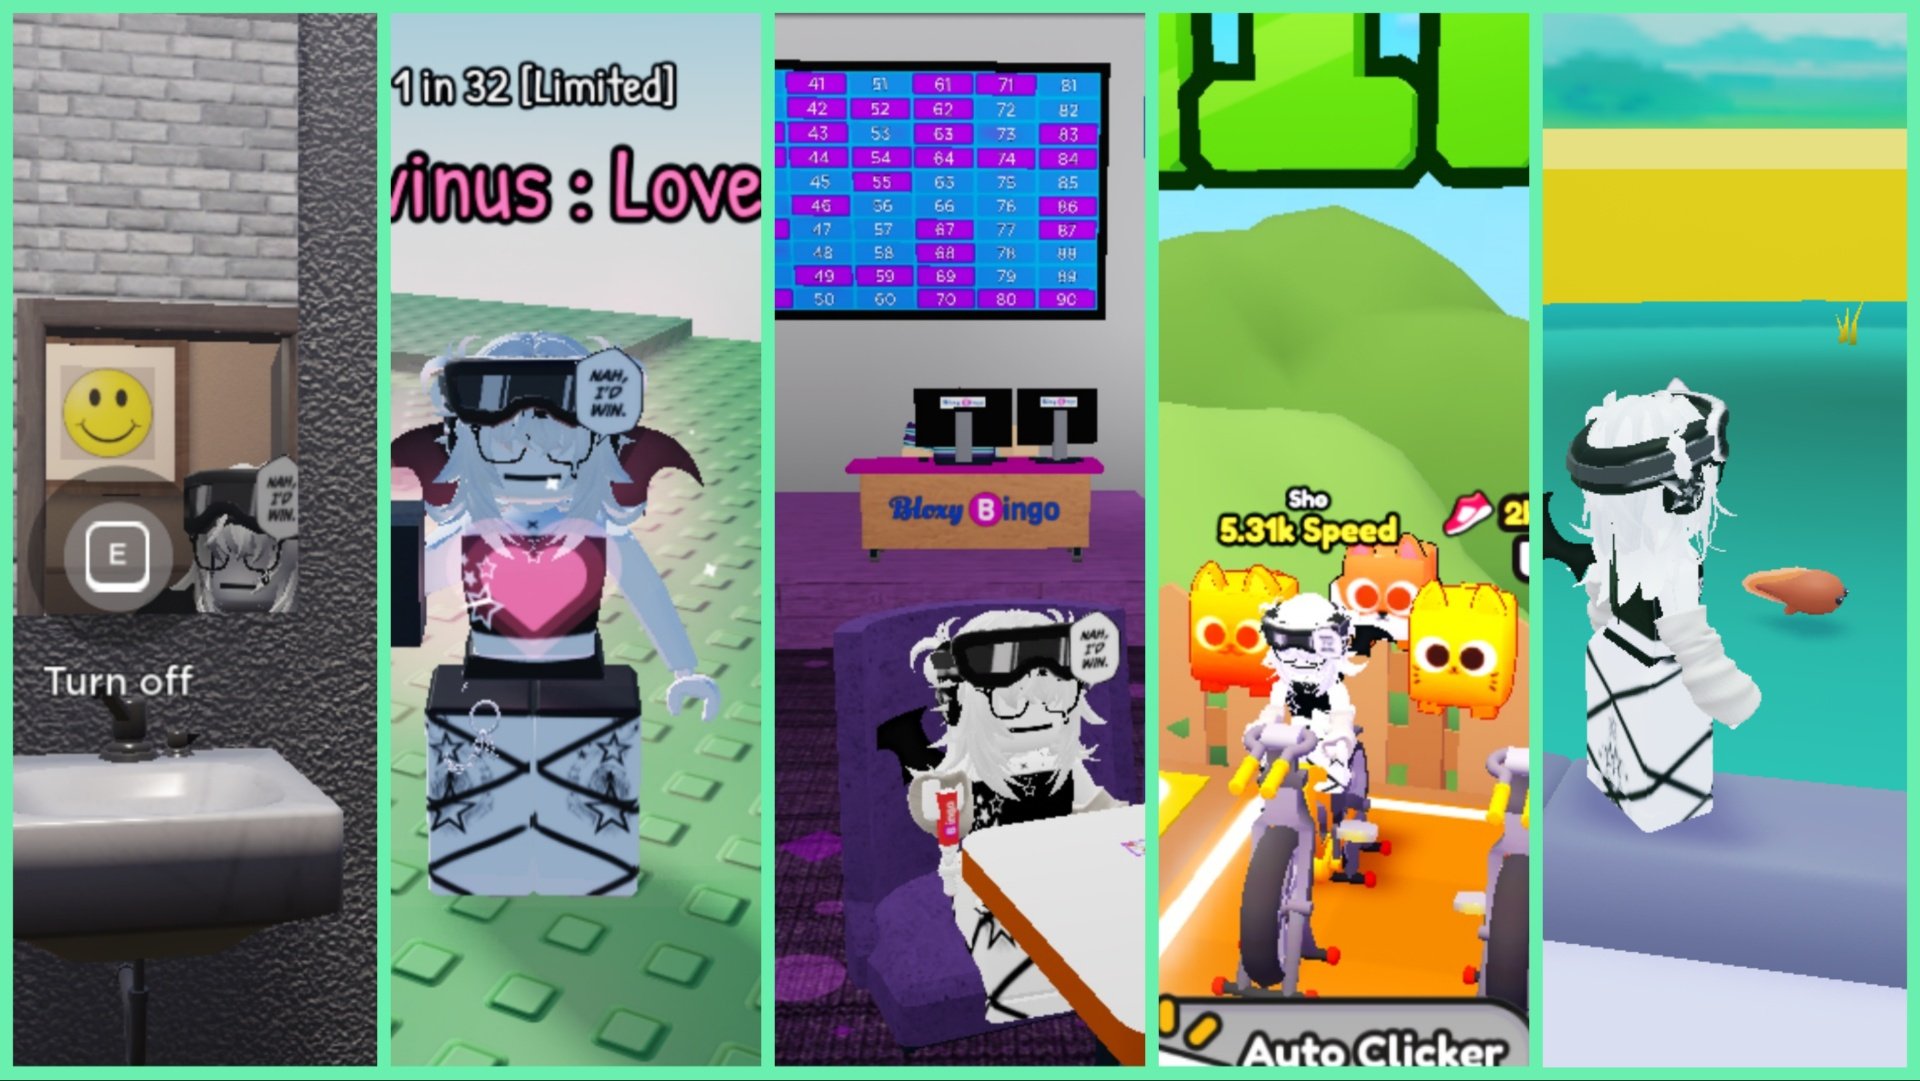 Our Favourite Picks For The Top Upcoming Roblox Games of The Week!